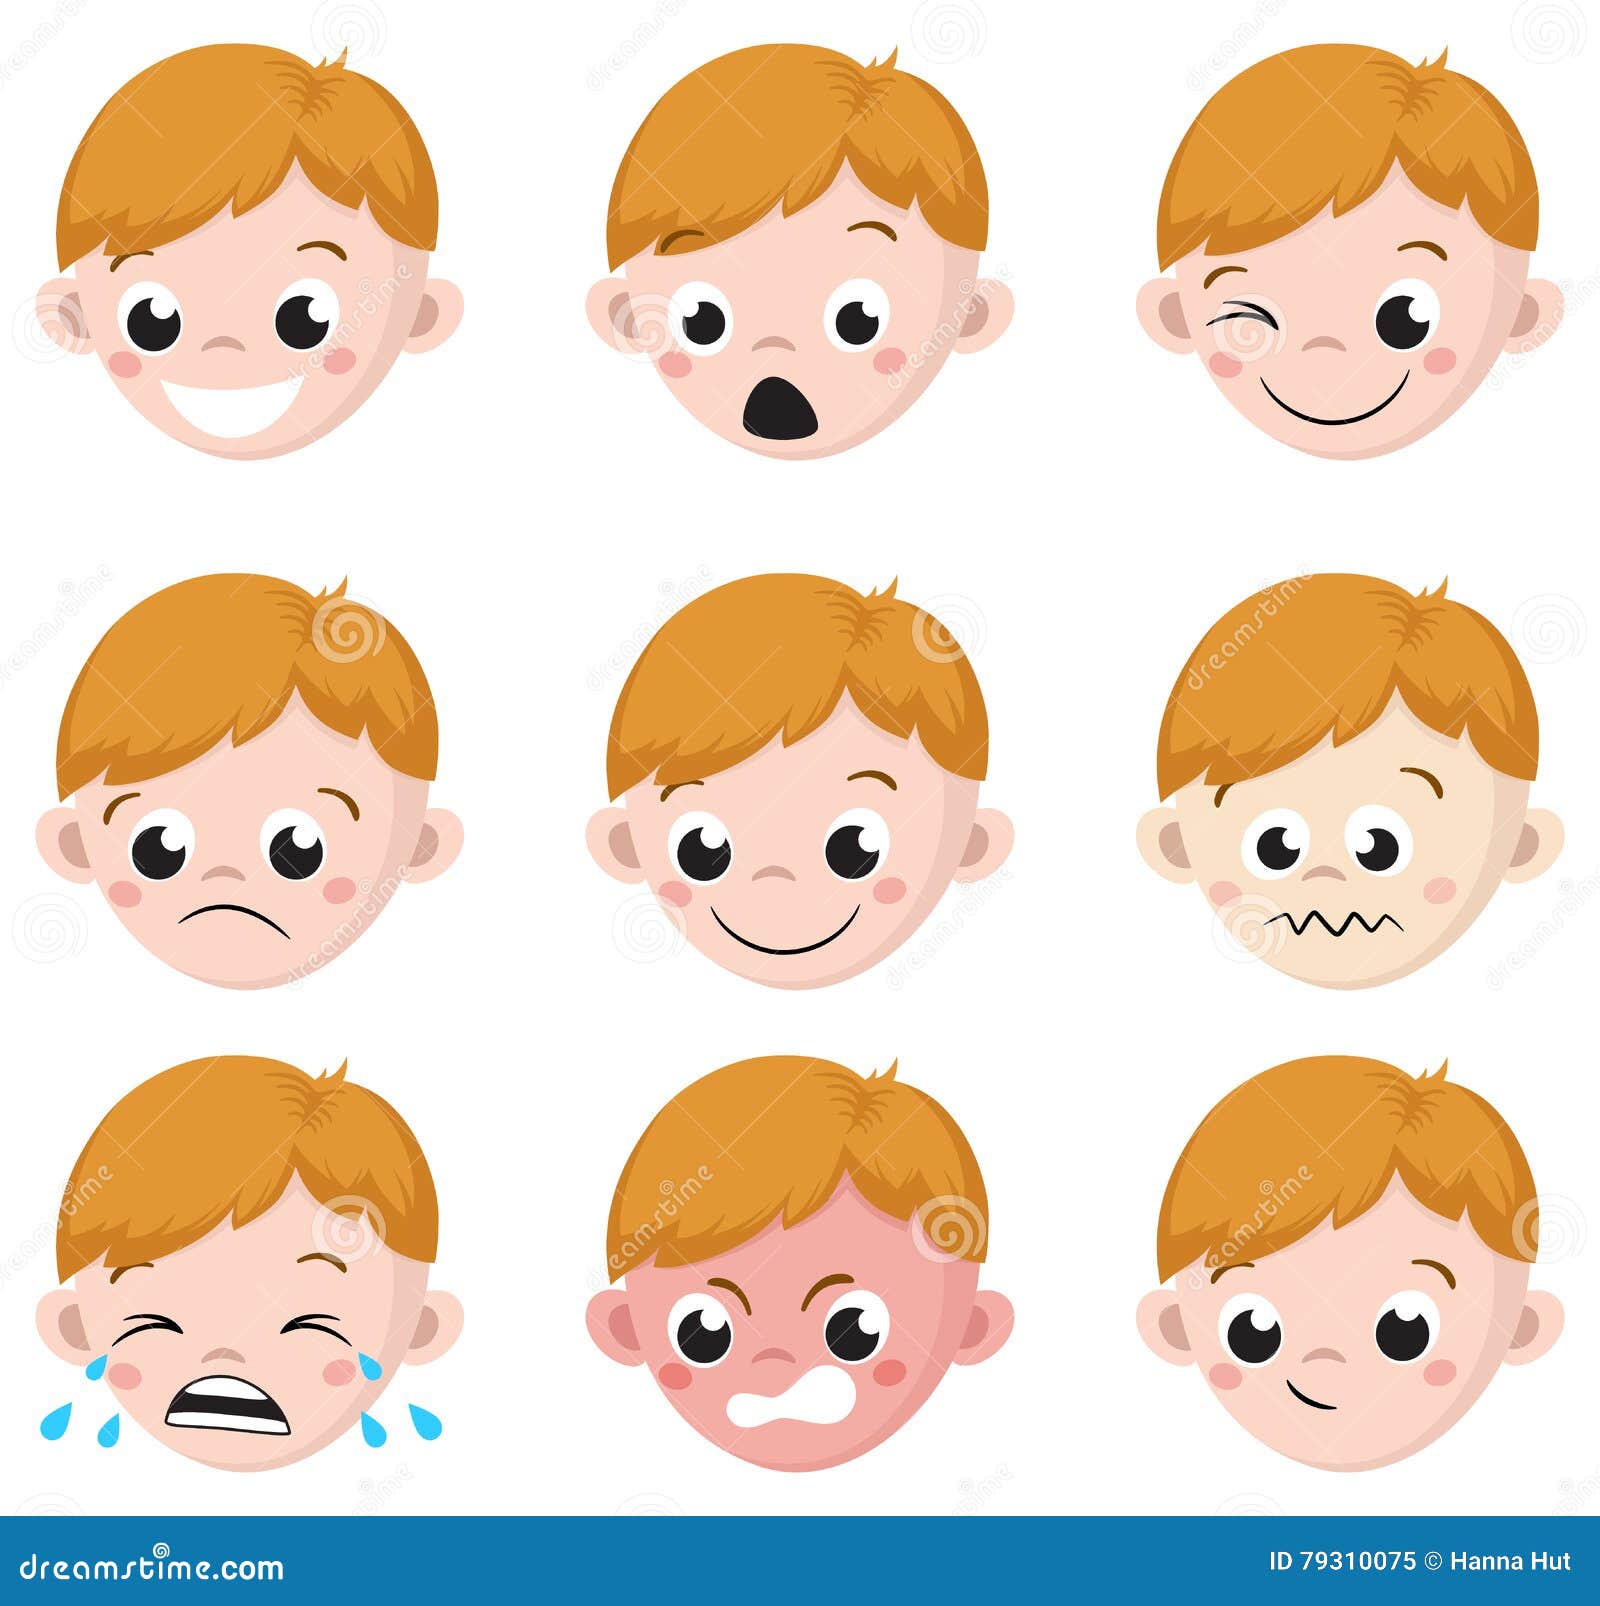 boy emotion faces cartoon.  set of male avatar expressions